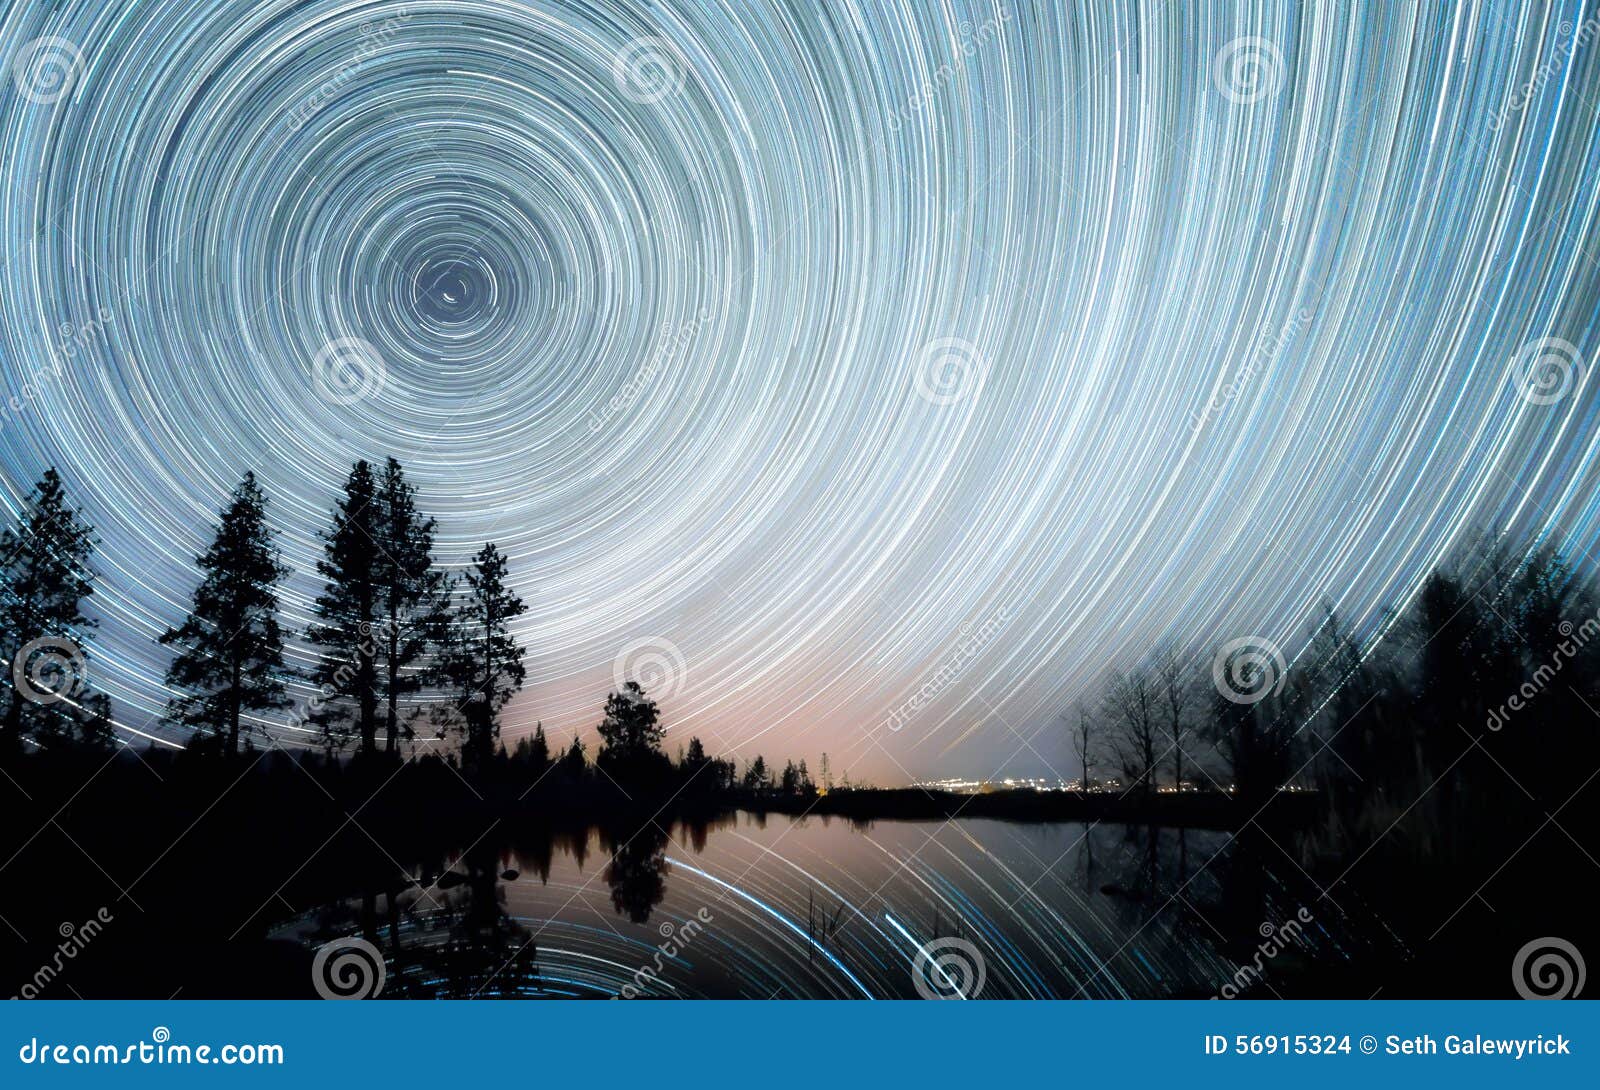 star trails over the pond